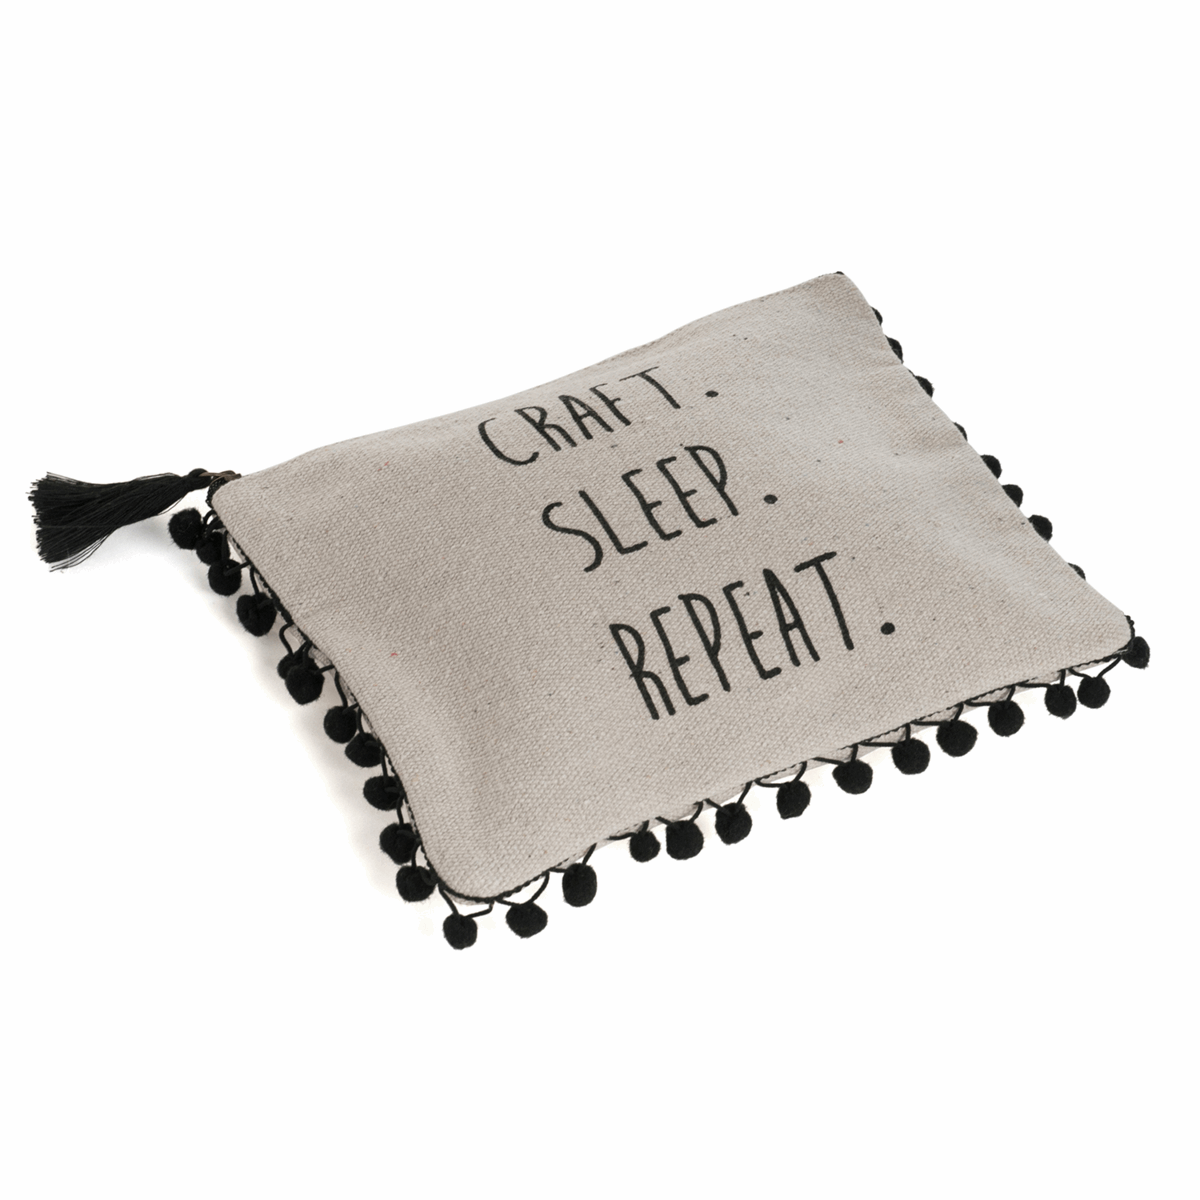 Craft, Sleep, Repeat Project Pouch